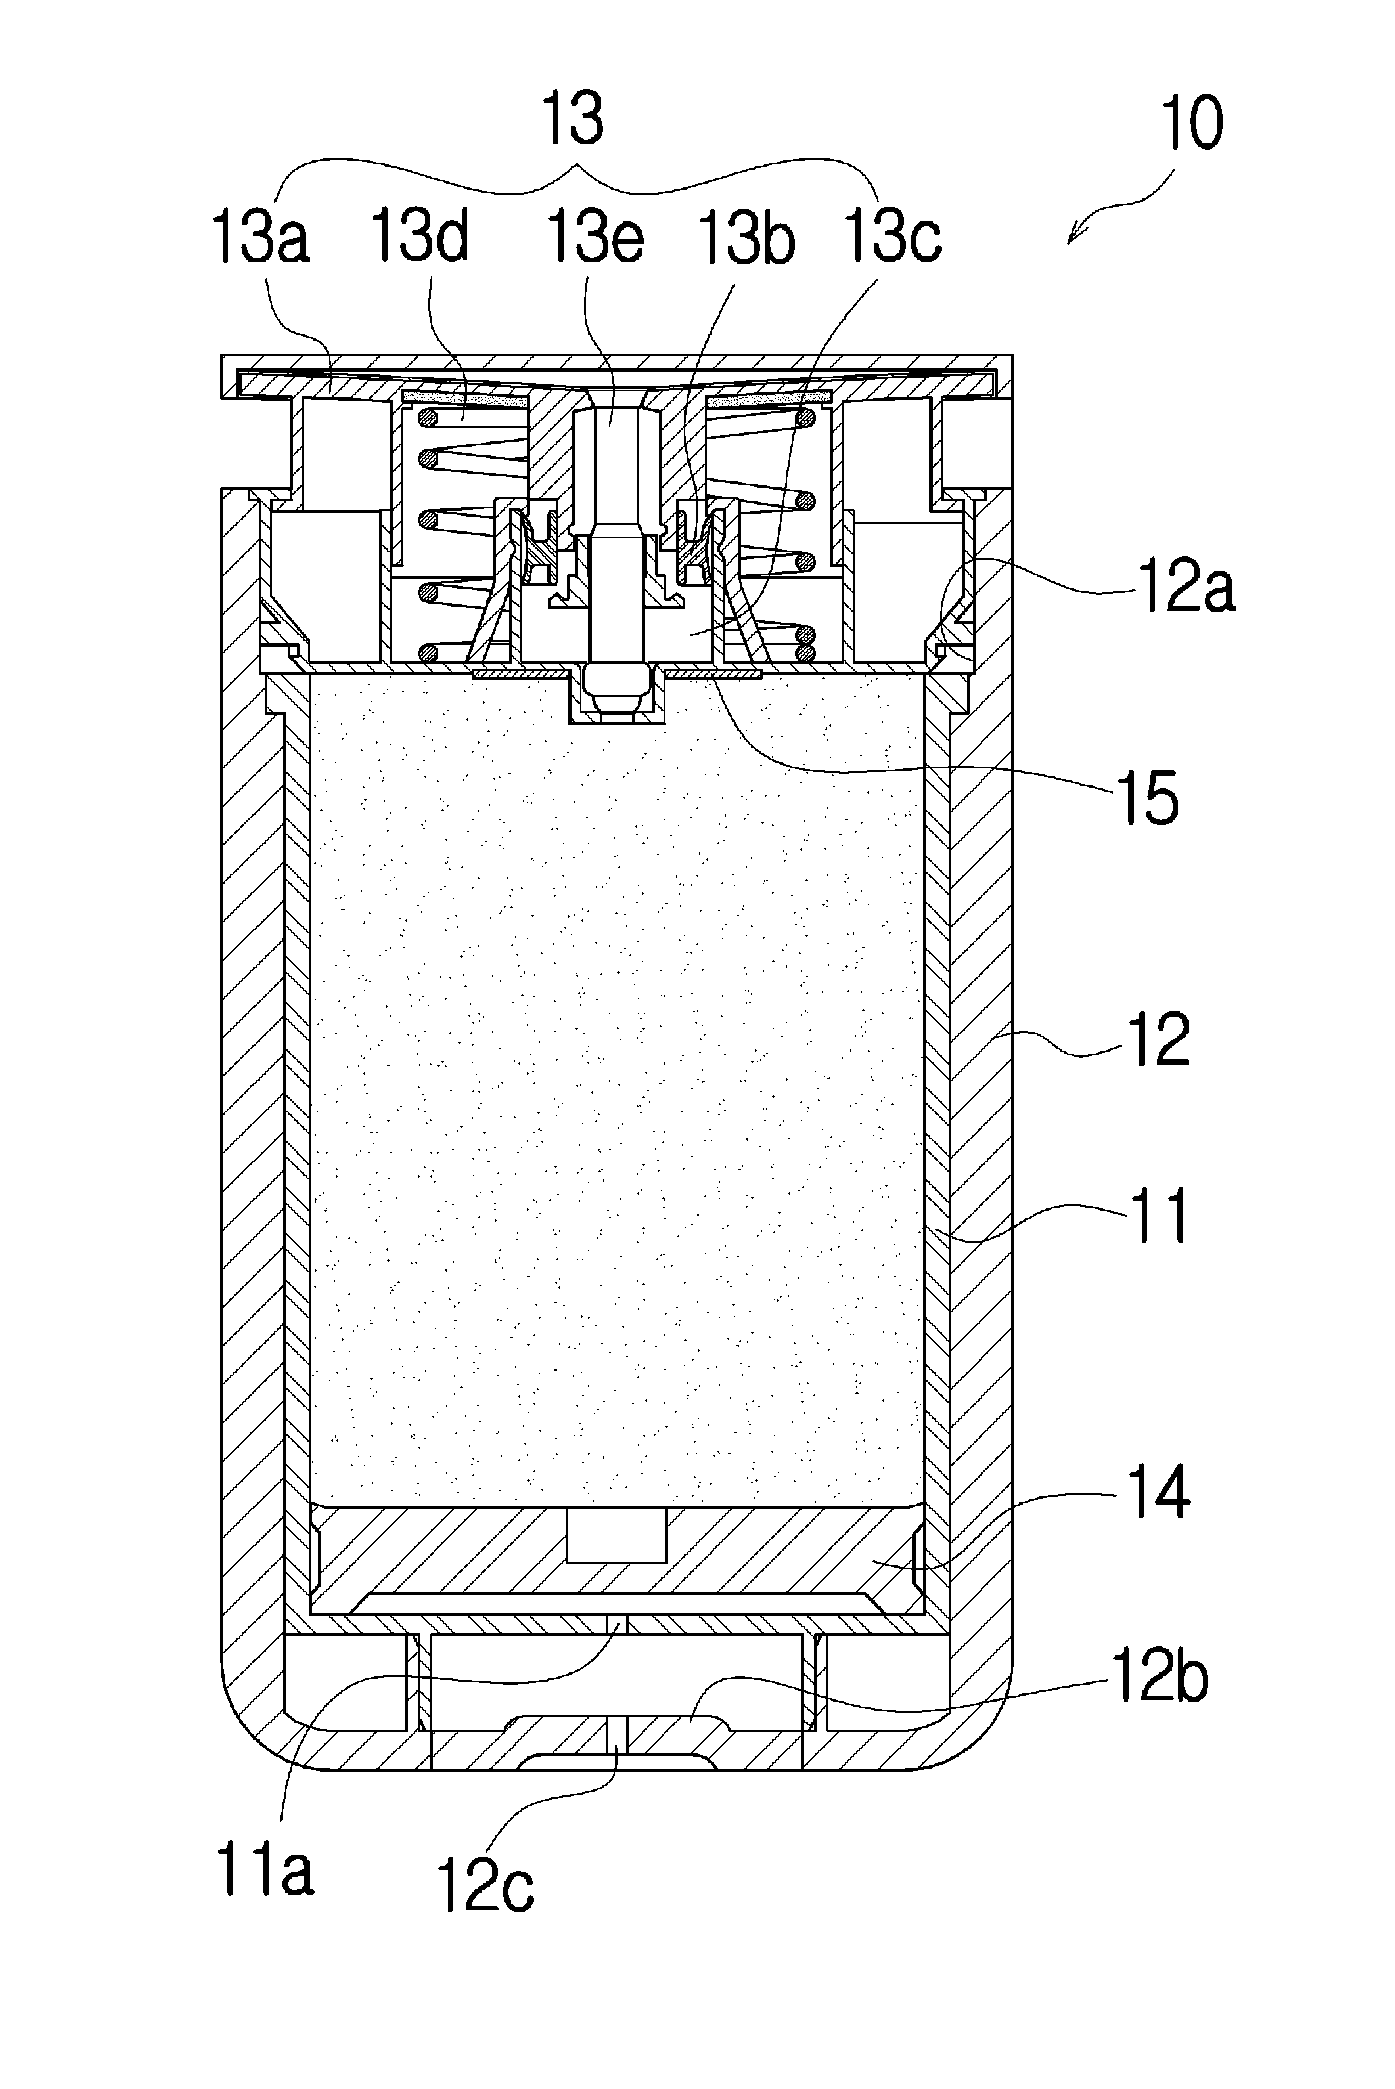 Cosmetic container having an airless pump and enabling the quantity of content remaining in the container to be checked